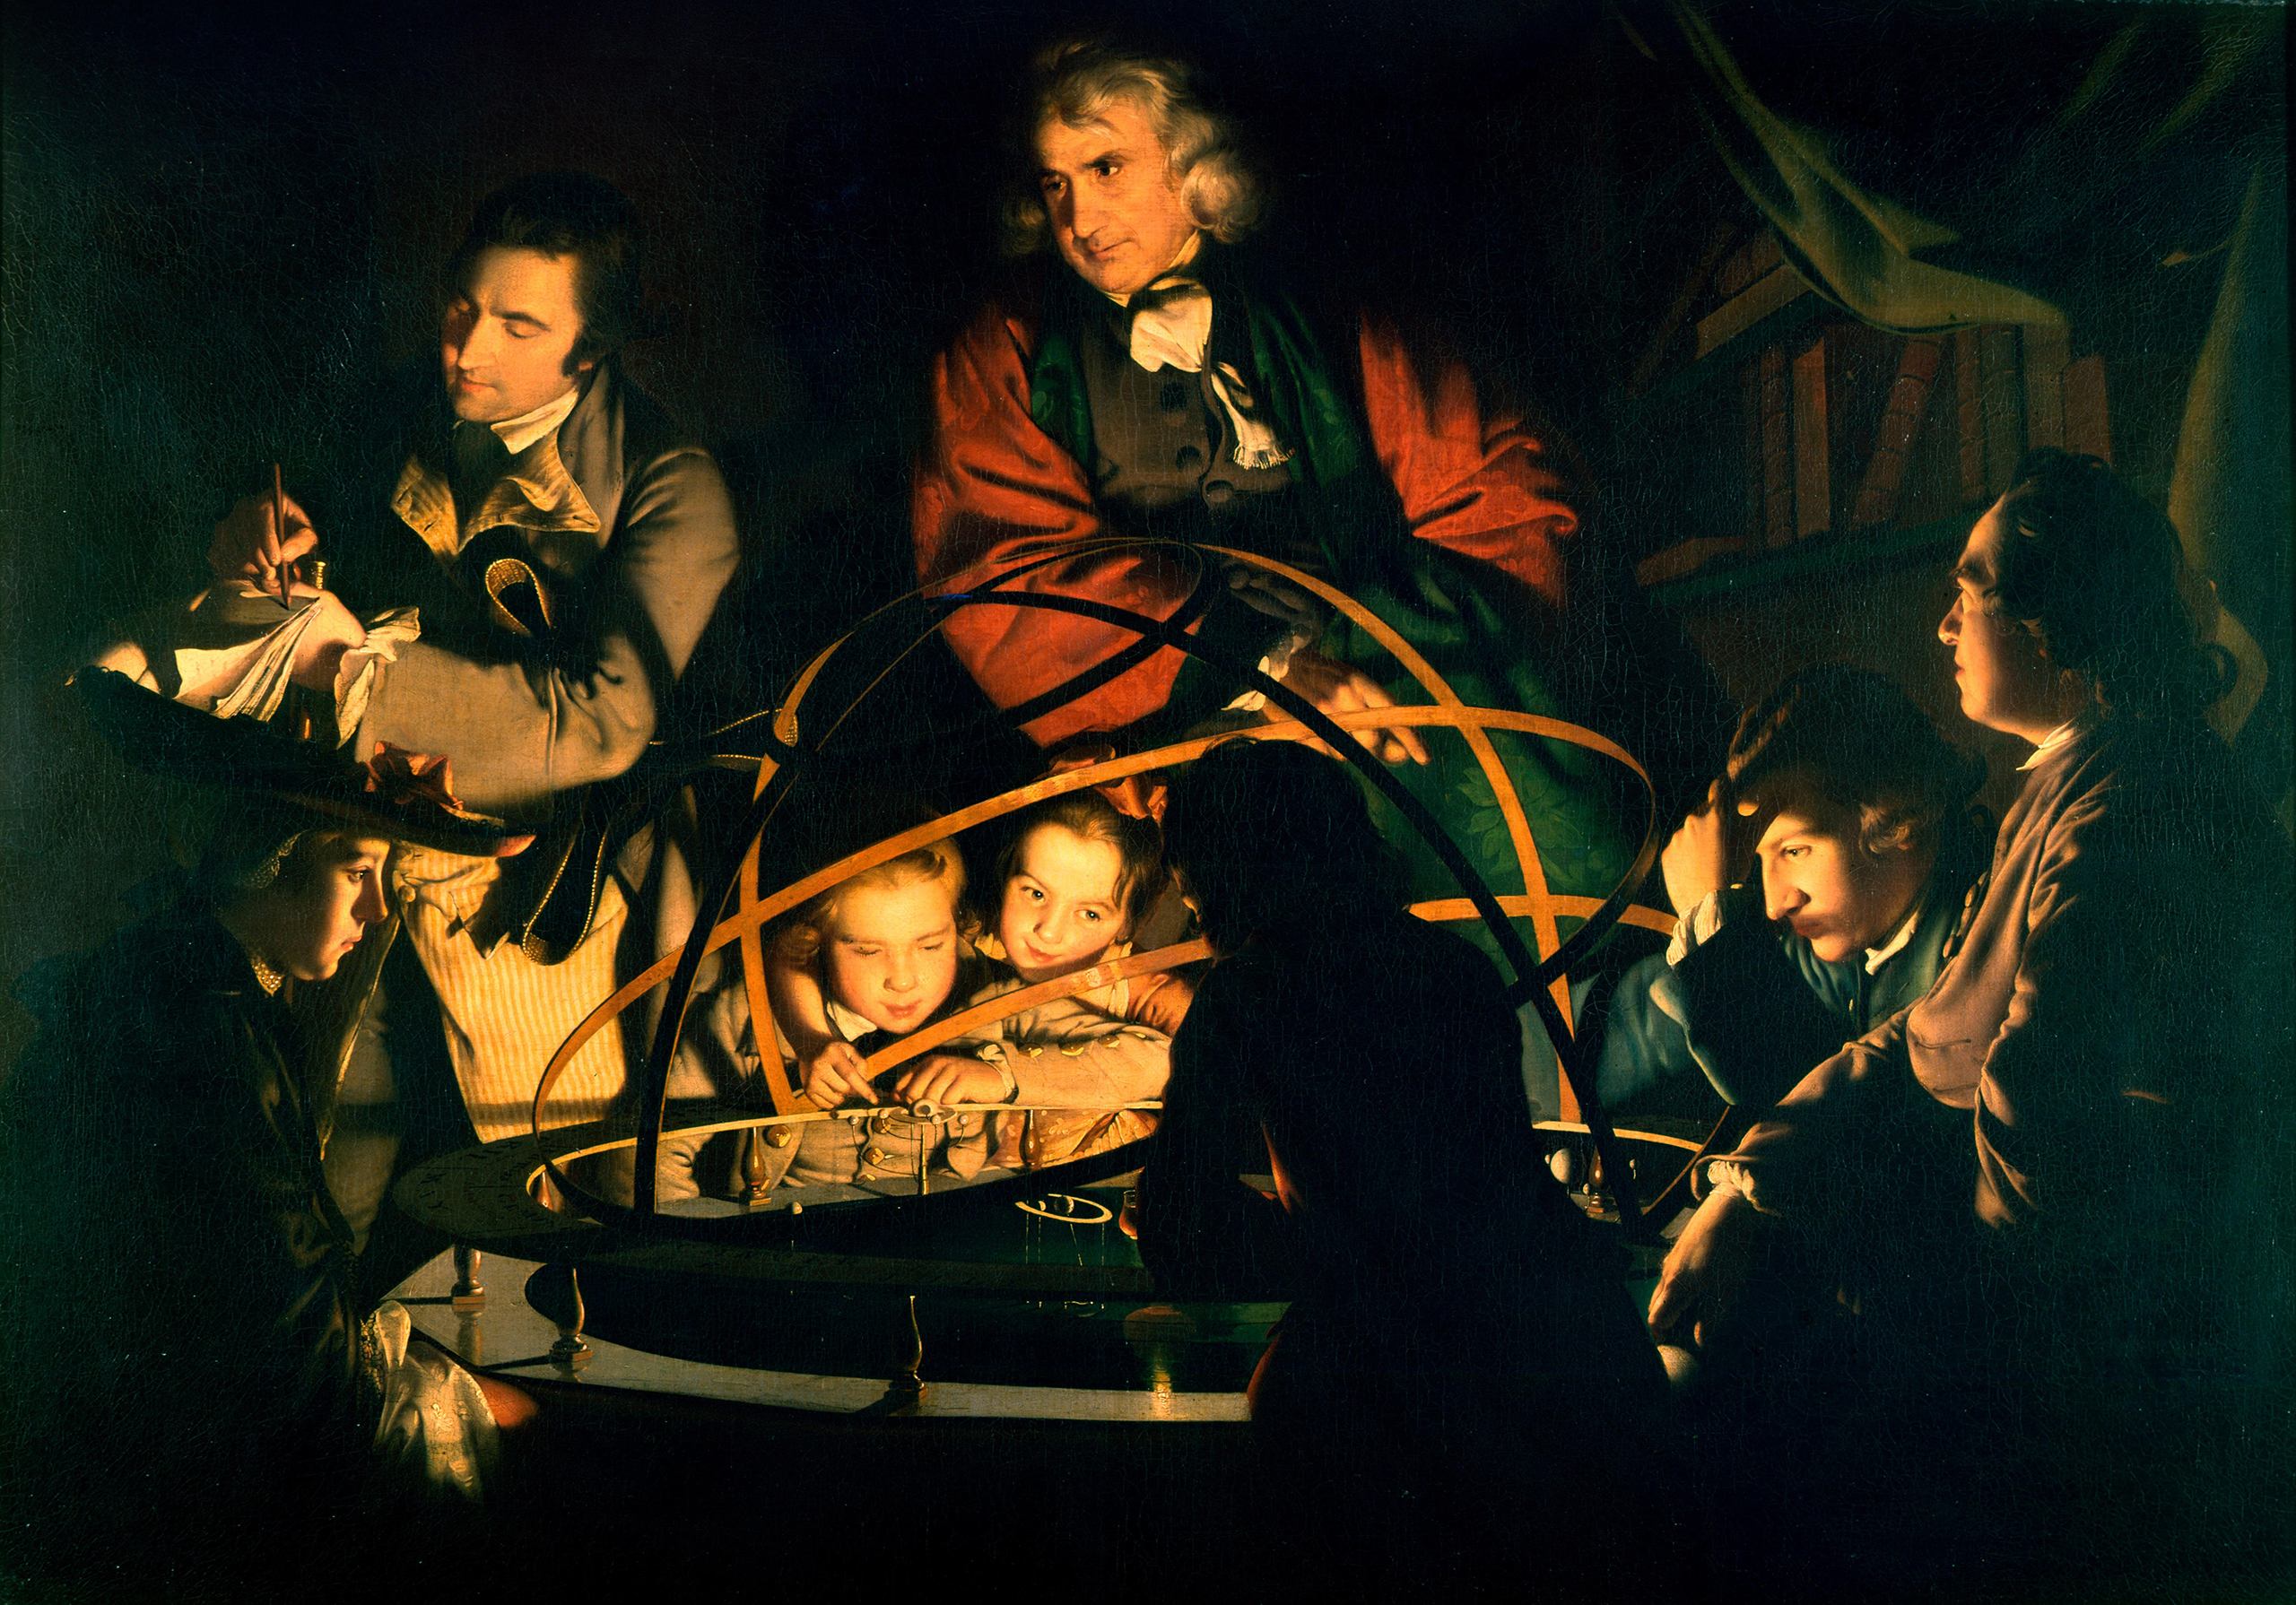 The Enlightenment romanticized the pursuit of scientific knowledge (as depicted in this 1766 Joseph Wright painting of a philosopher giving a lecture), which was disruptive for those accustomed to tradition and religion. (Painting by Joseph Wright of Derby)